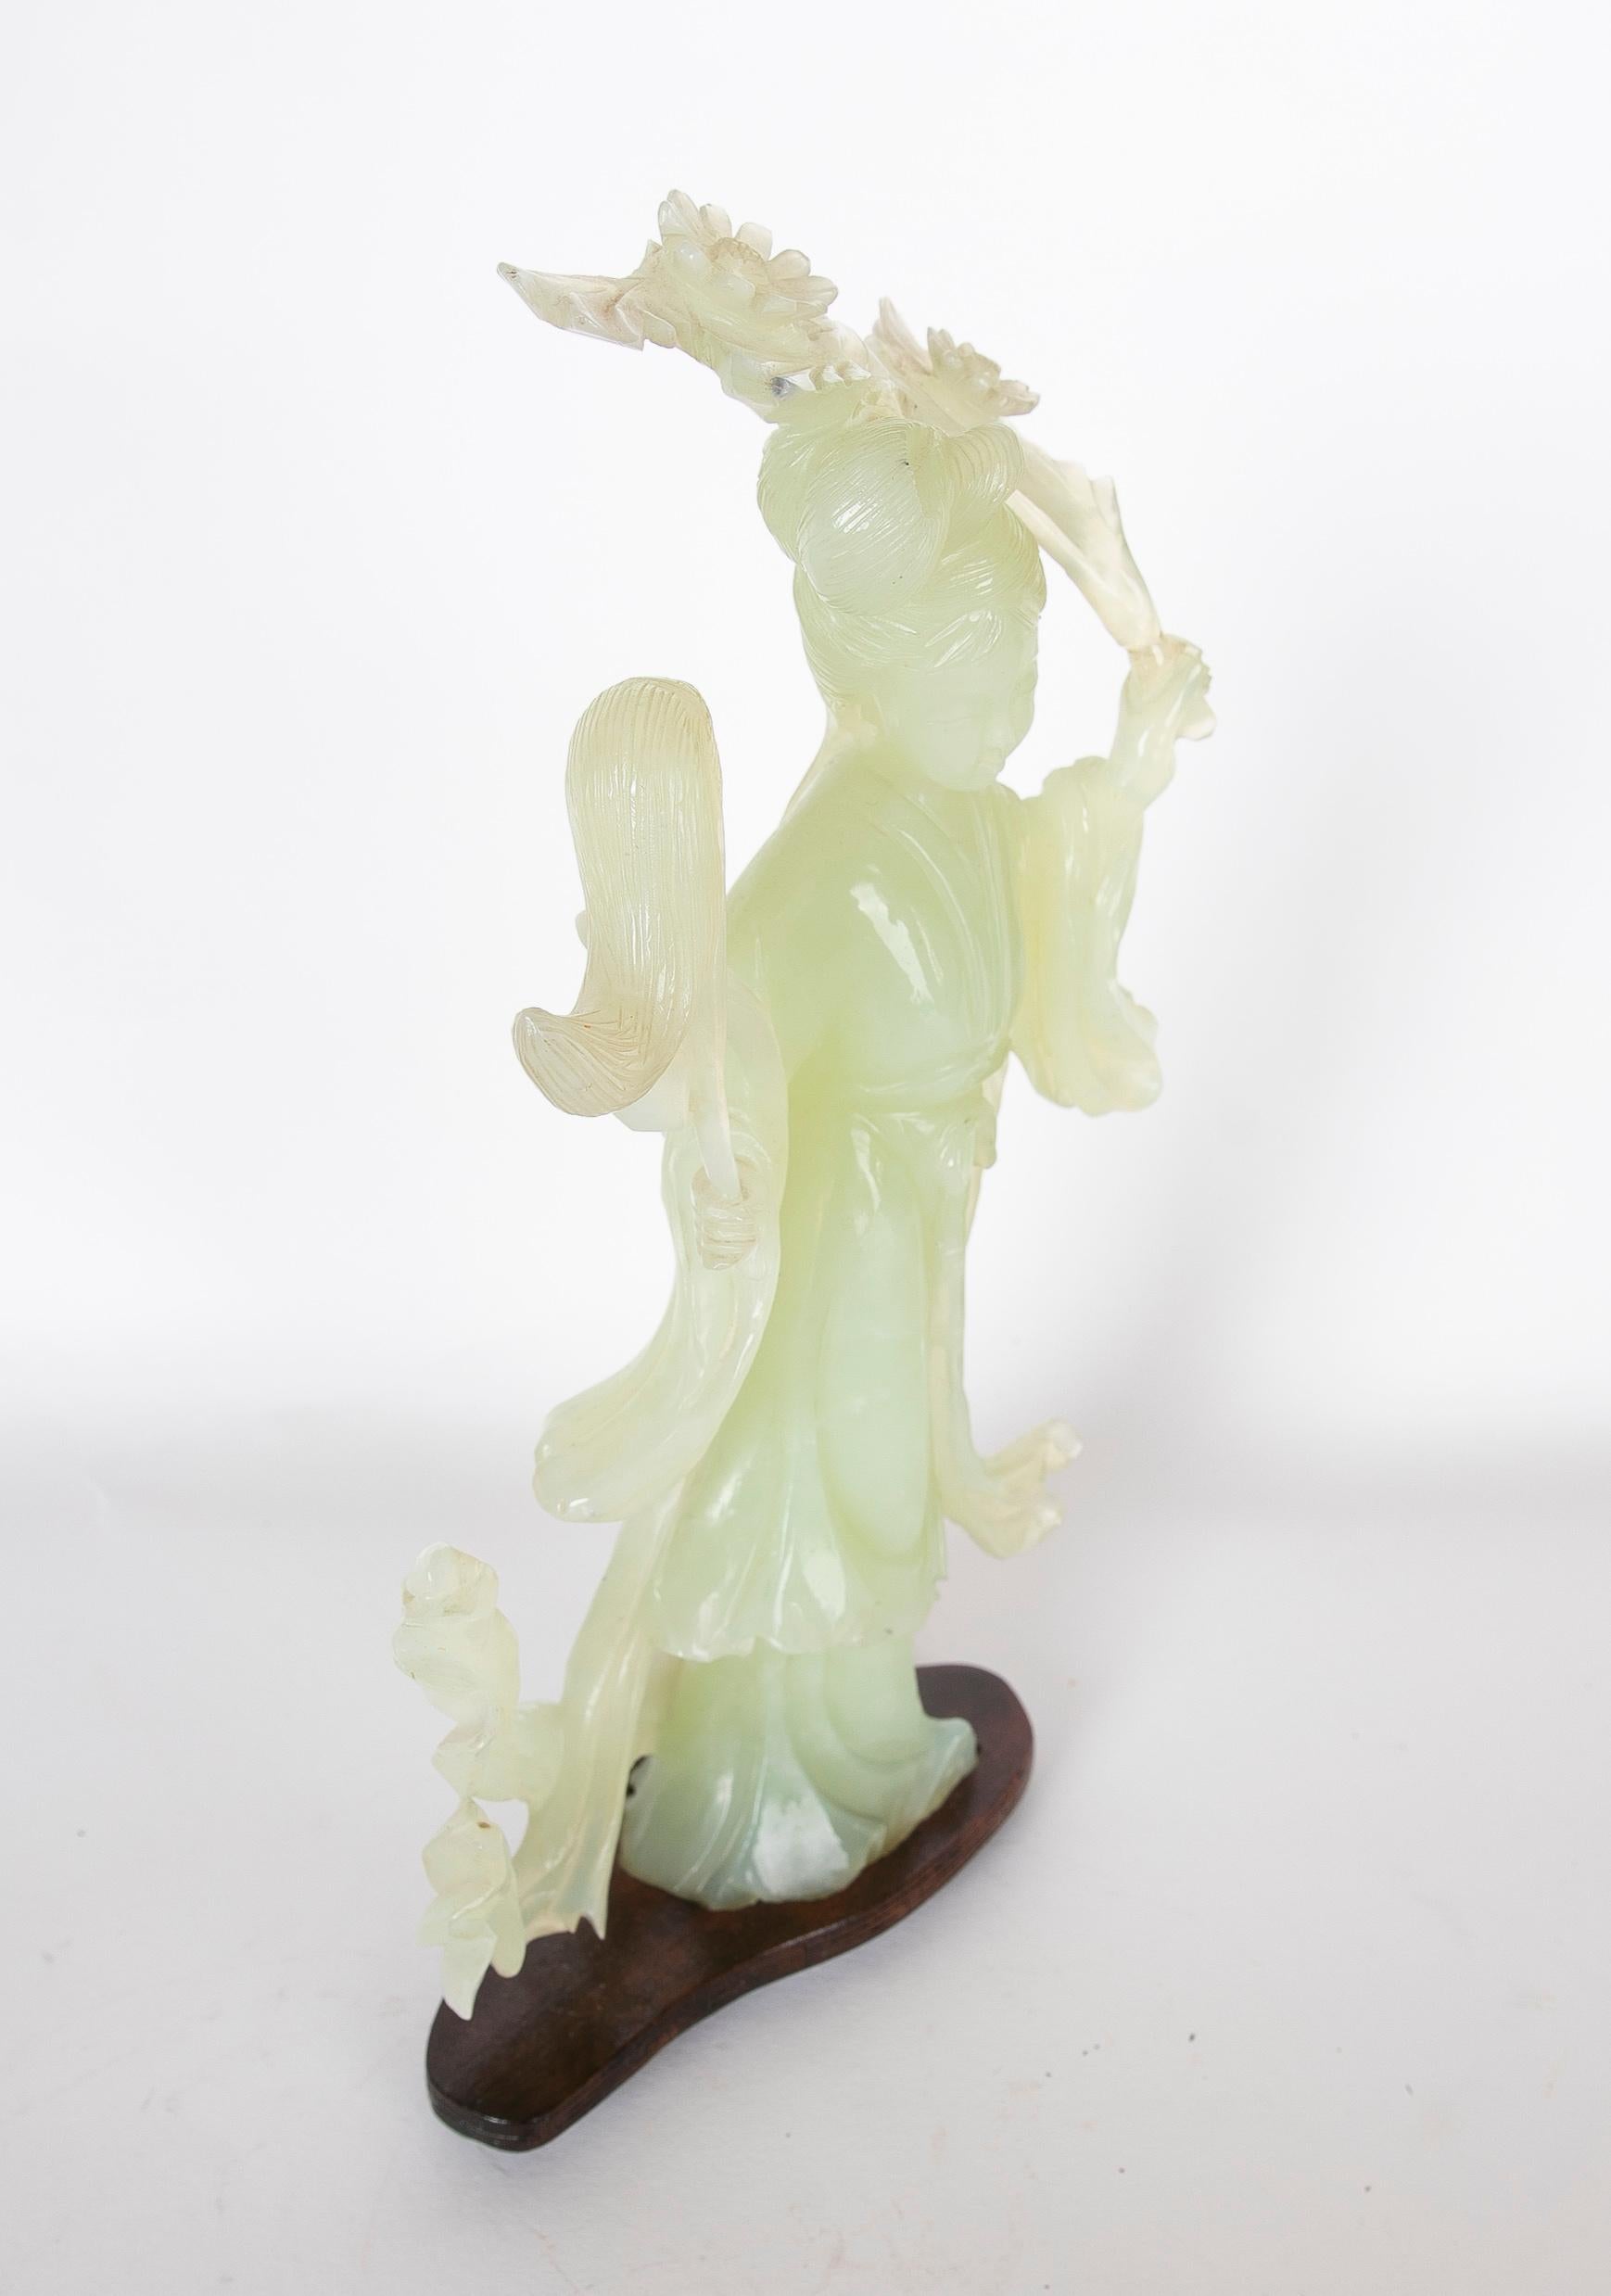 Hand-Carved Jadeite Figurine of an Oriental Woman on a Wooden Base For Sale 2